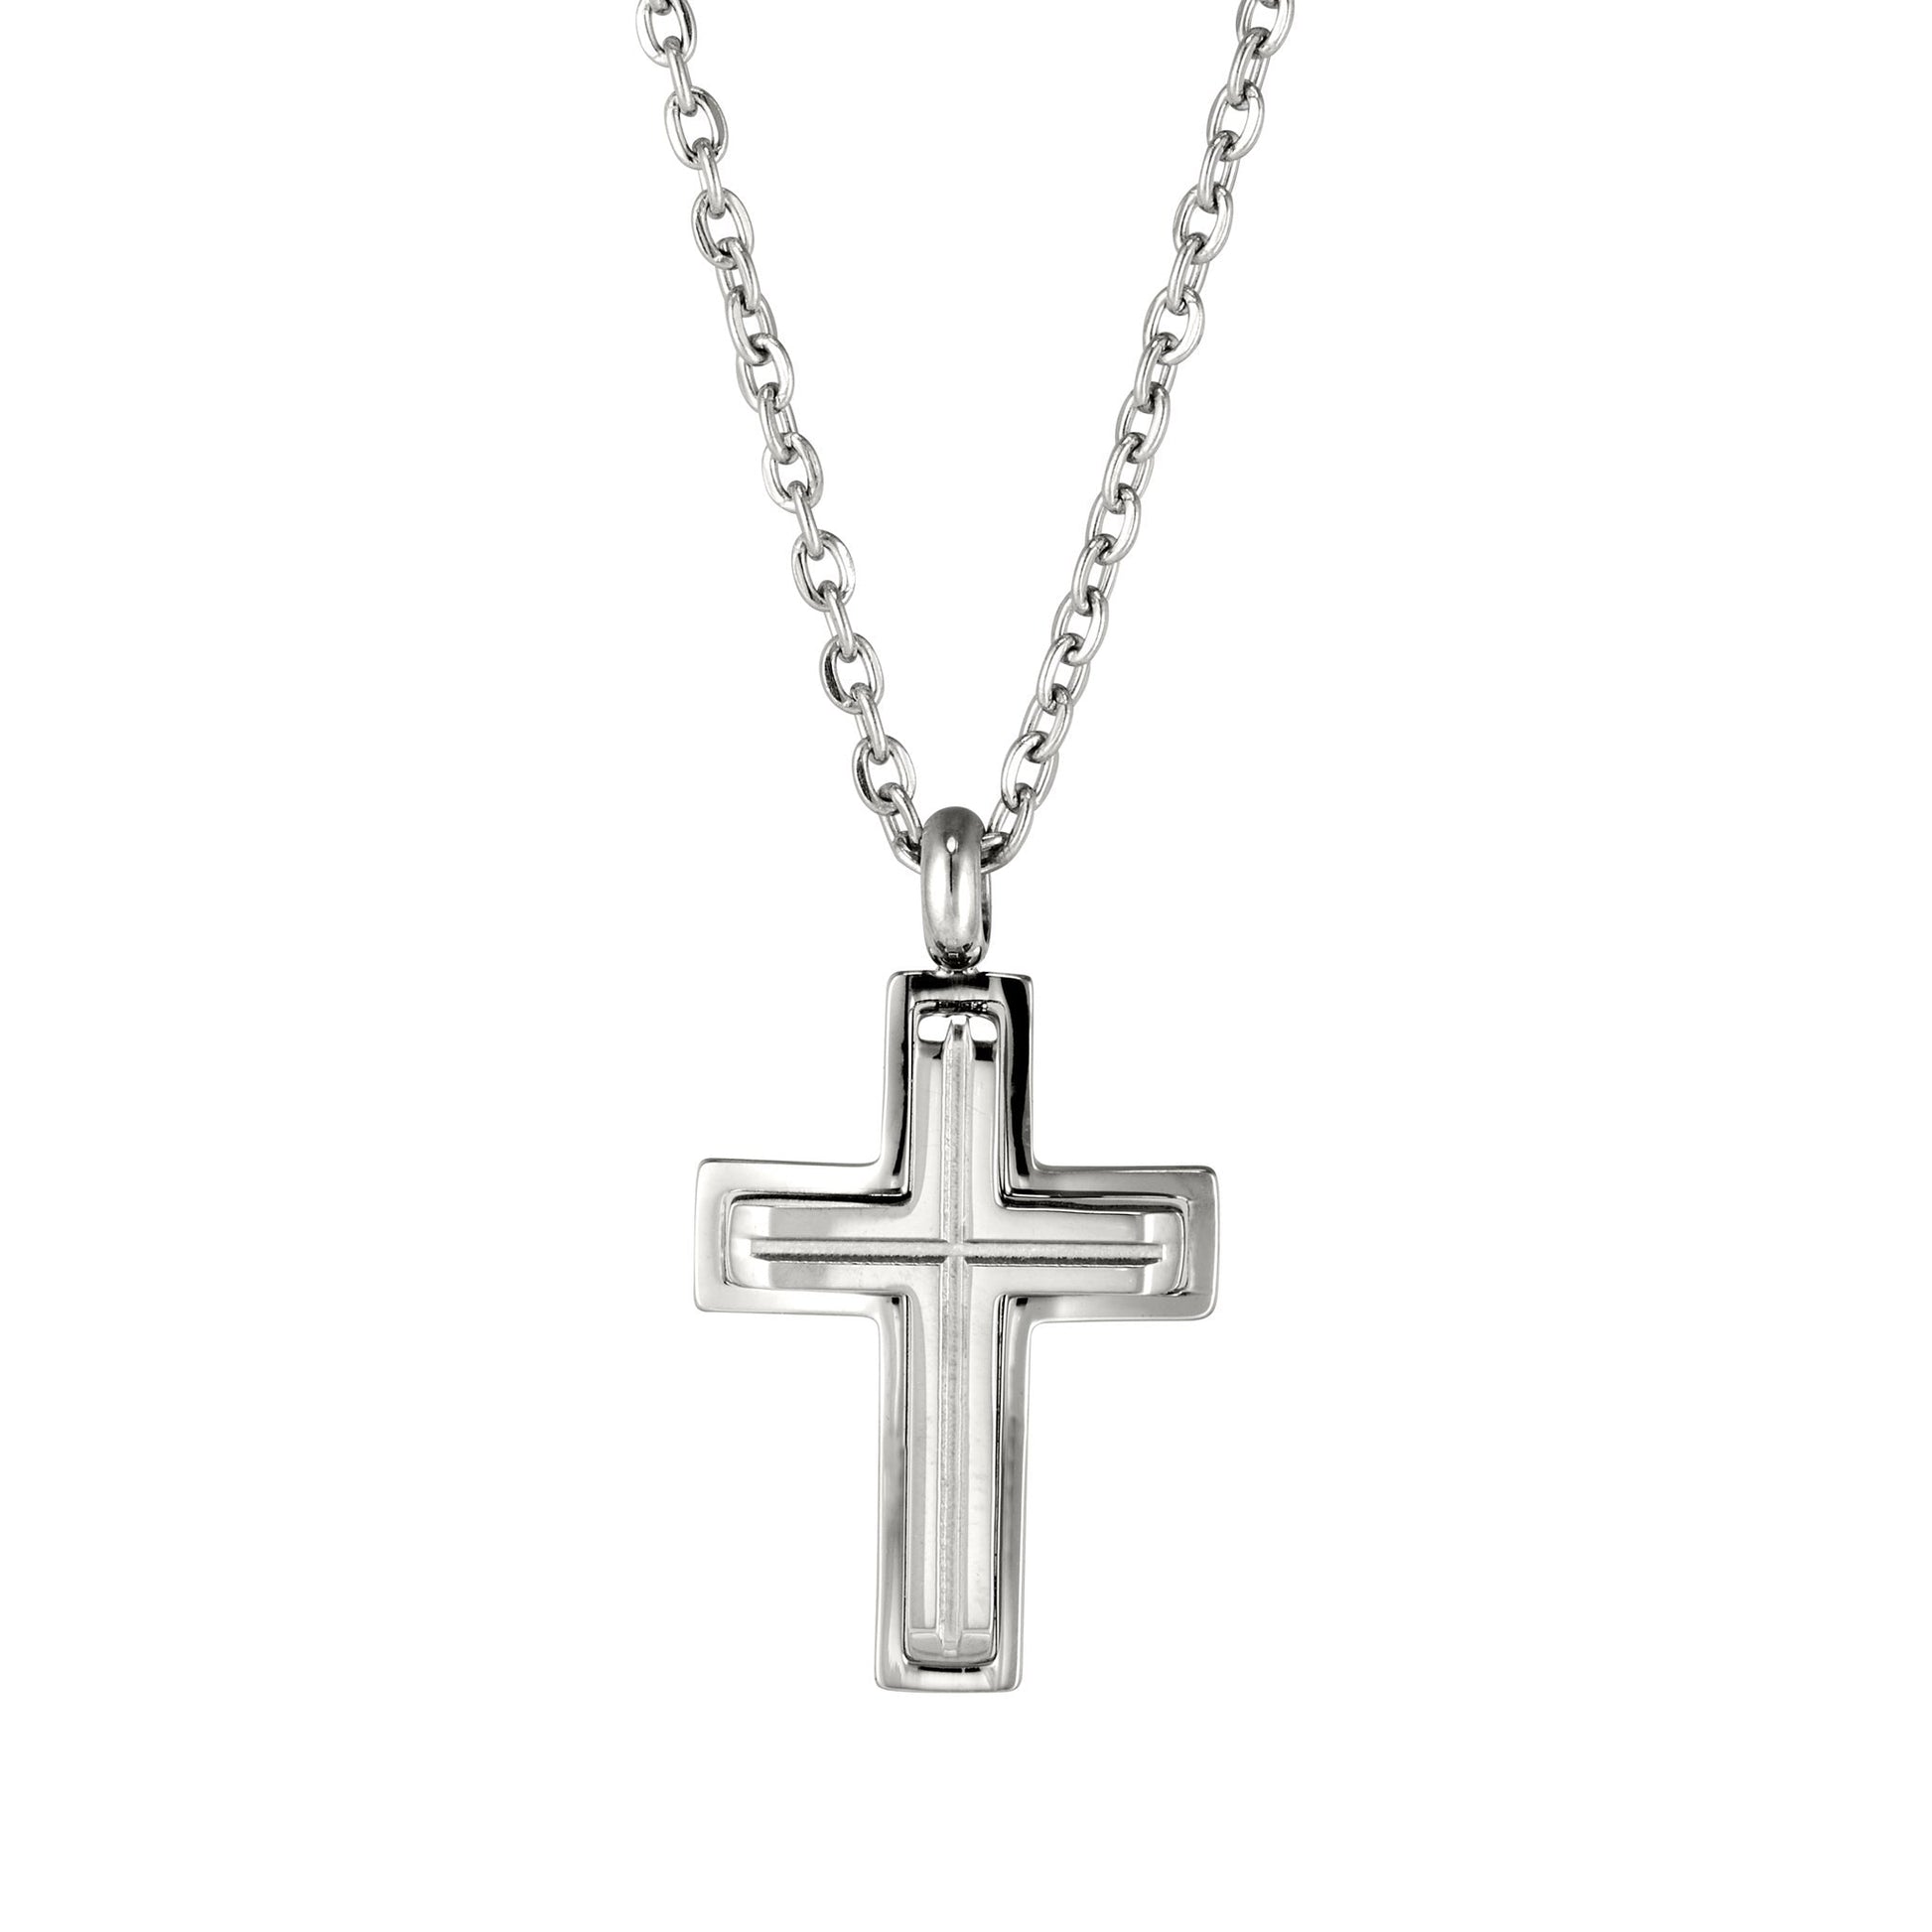 A stainless steel small cross with raised center on 20" chain displayed on a neutral white background.